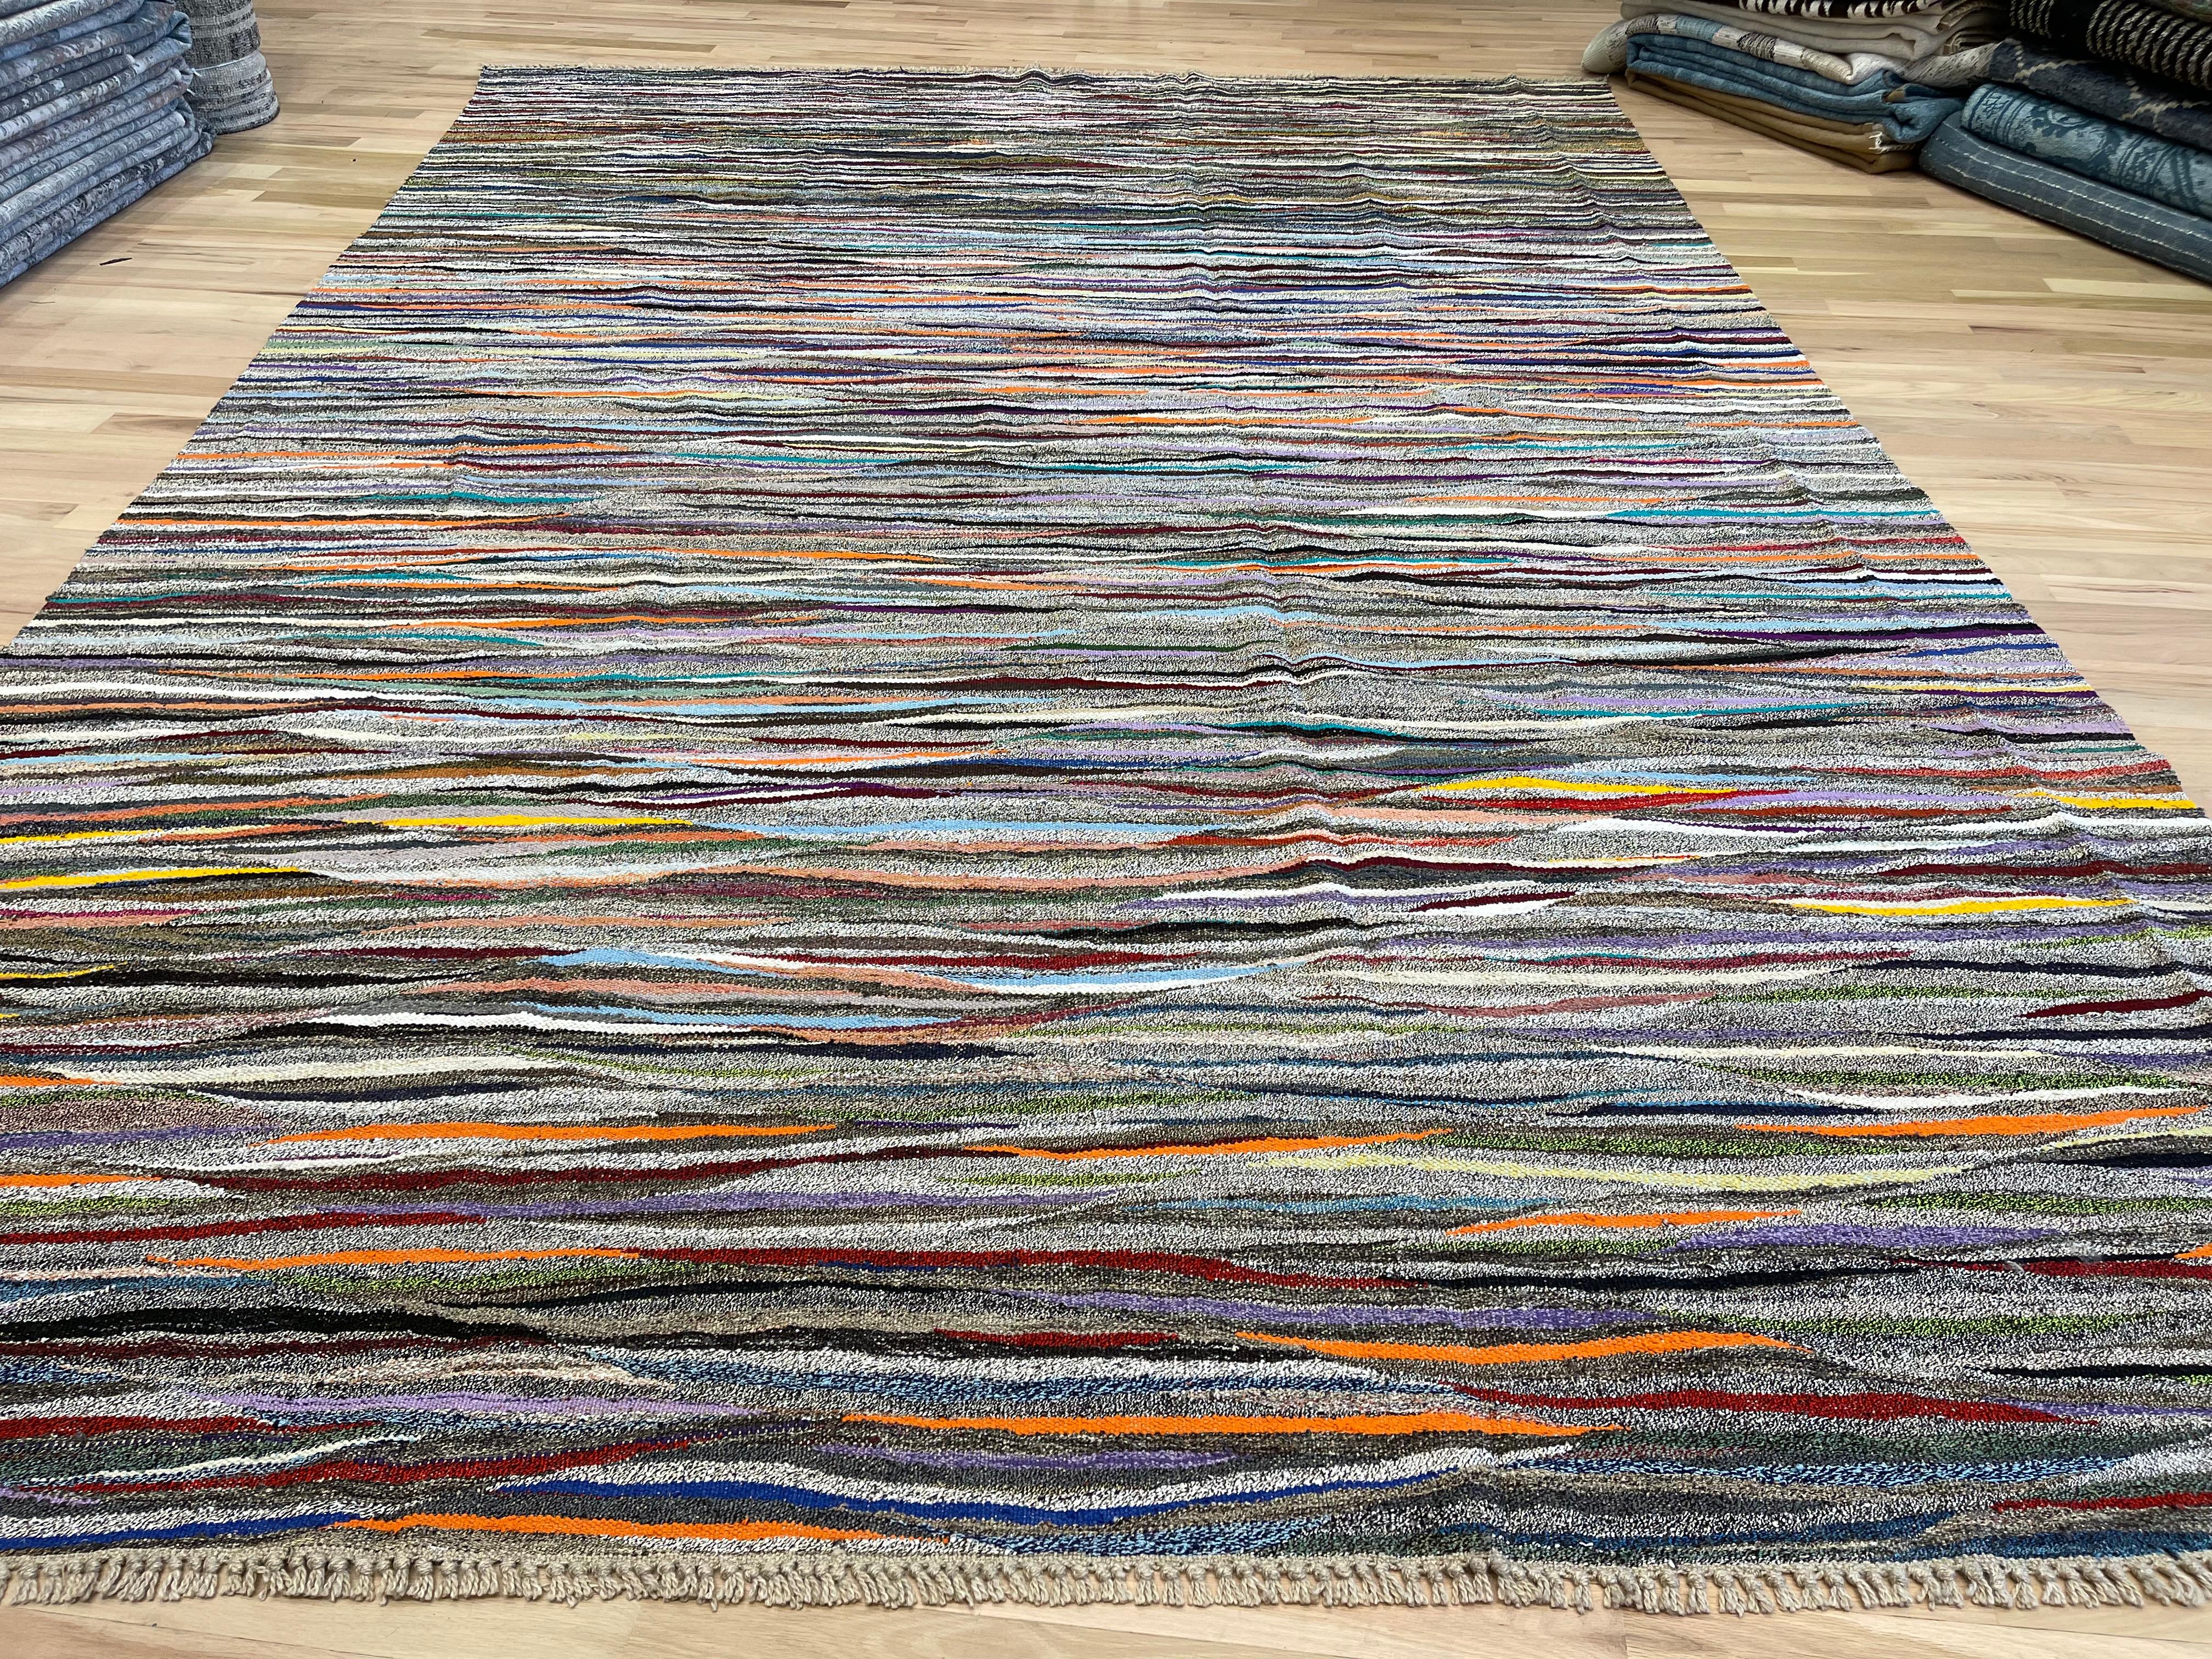 This Turkish rug features a colorful wave design and is reversible, allowing you to switch up your decor. Add a touch of style to any room while also having the option to change things up to suit your mood. Beautiful and versatile, this rug is a